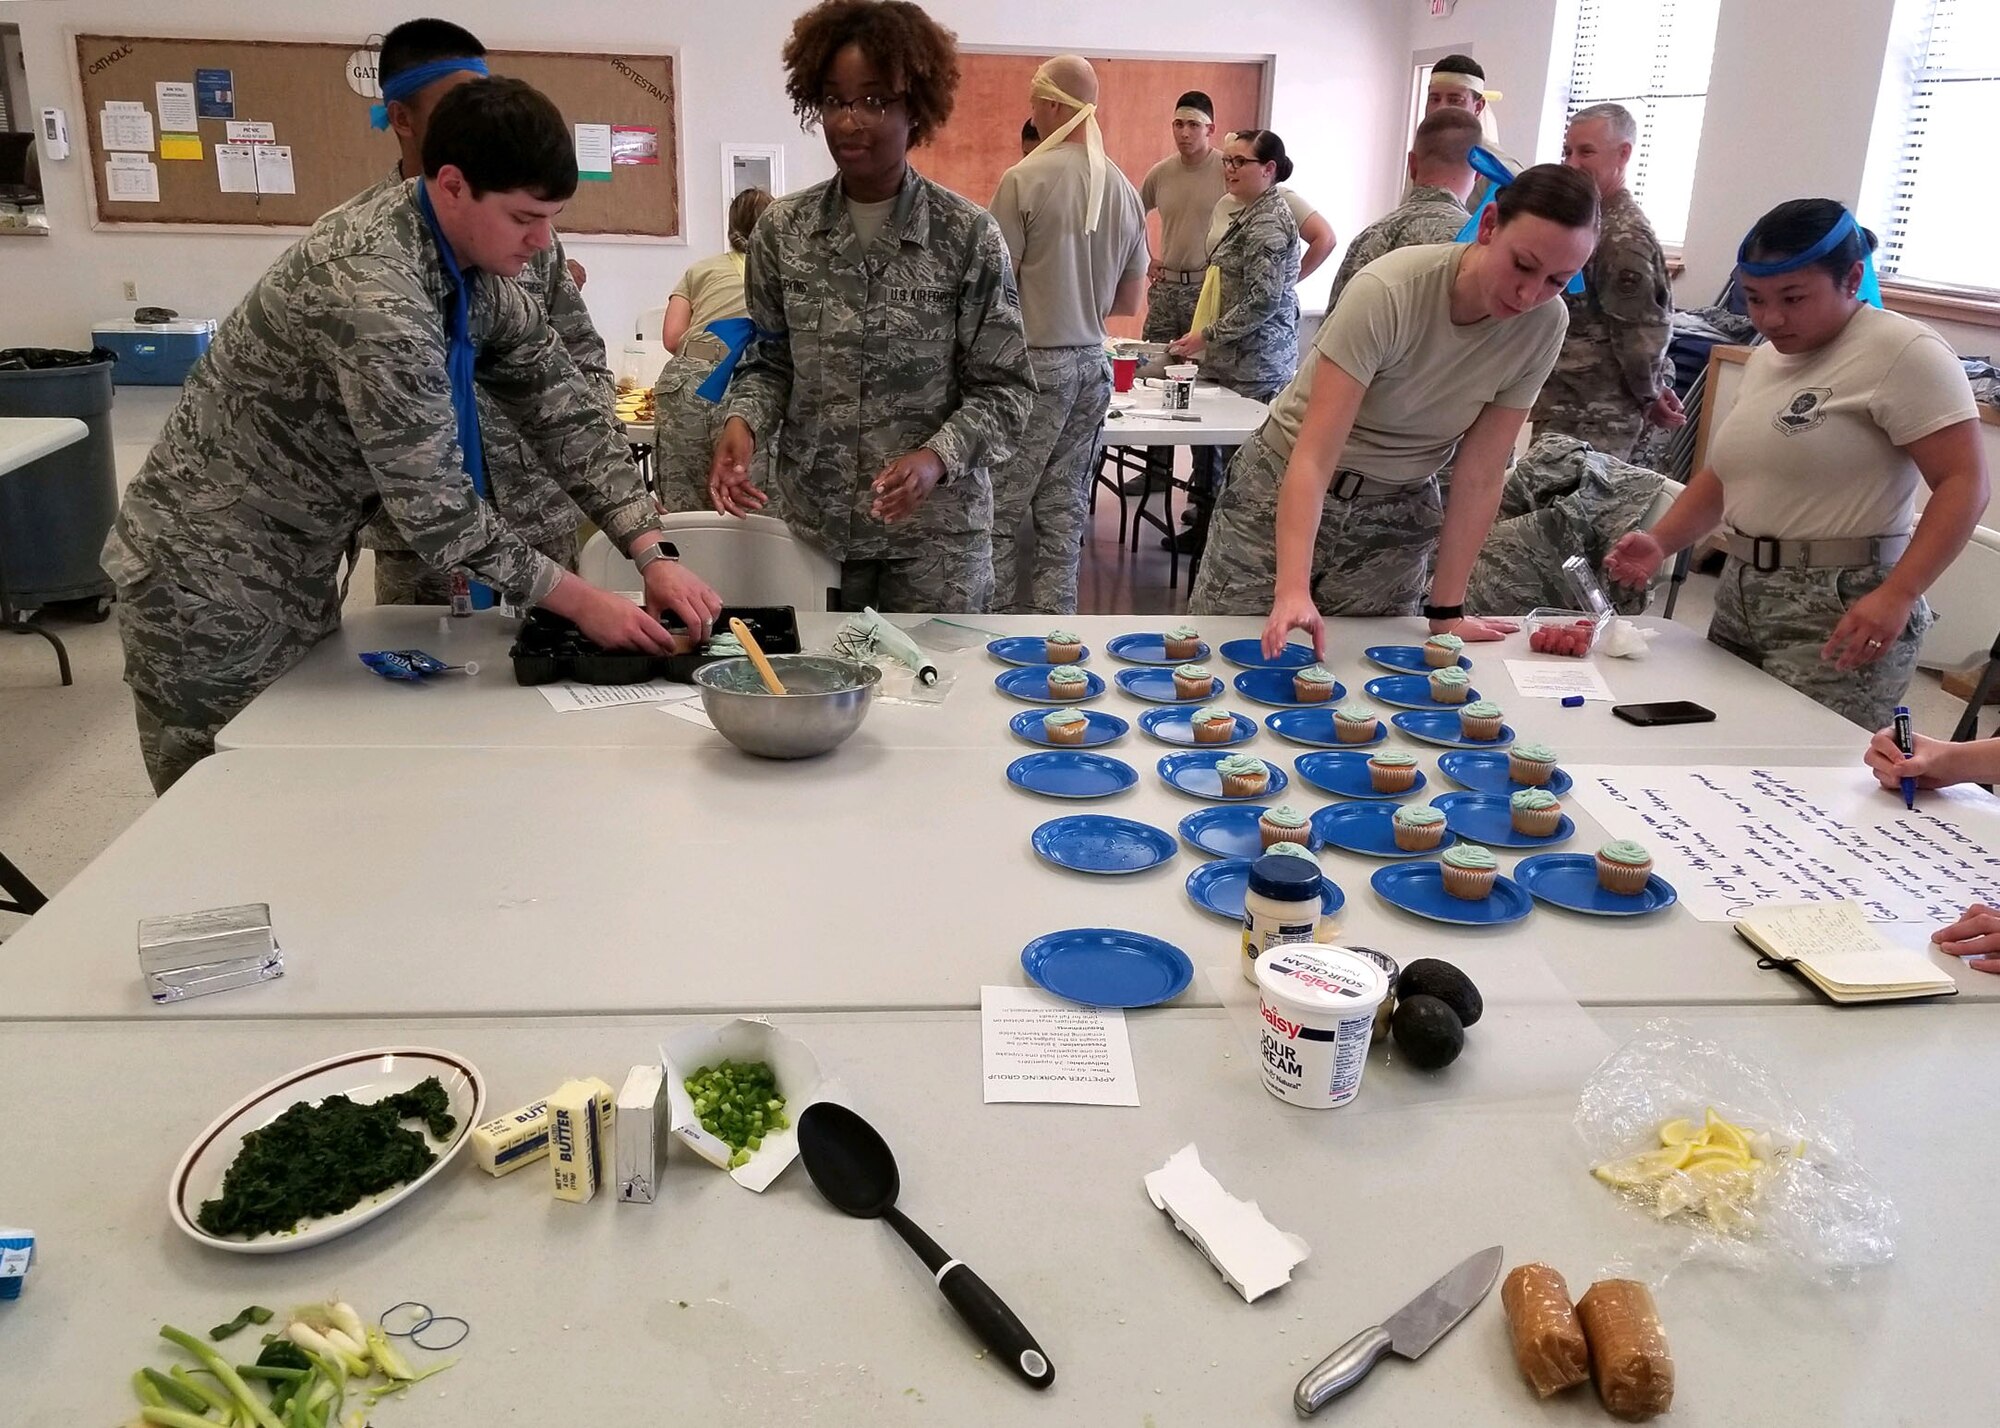 Airmen from the 49th Aerospace Medicine Squadron decorate cupcakes during a Unite program on Holloman Air Force Base, N.M. The program provides funds for 36 squadrons across the 49th Wing, to plan cohesion events. Each Airman is allotted $5 for food and beverage and $17.50 for programs and activities. (Courtesy Photo)